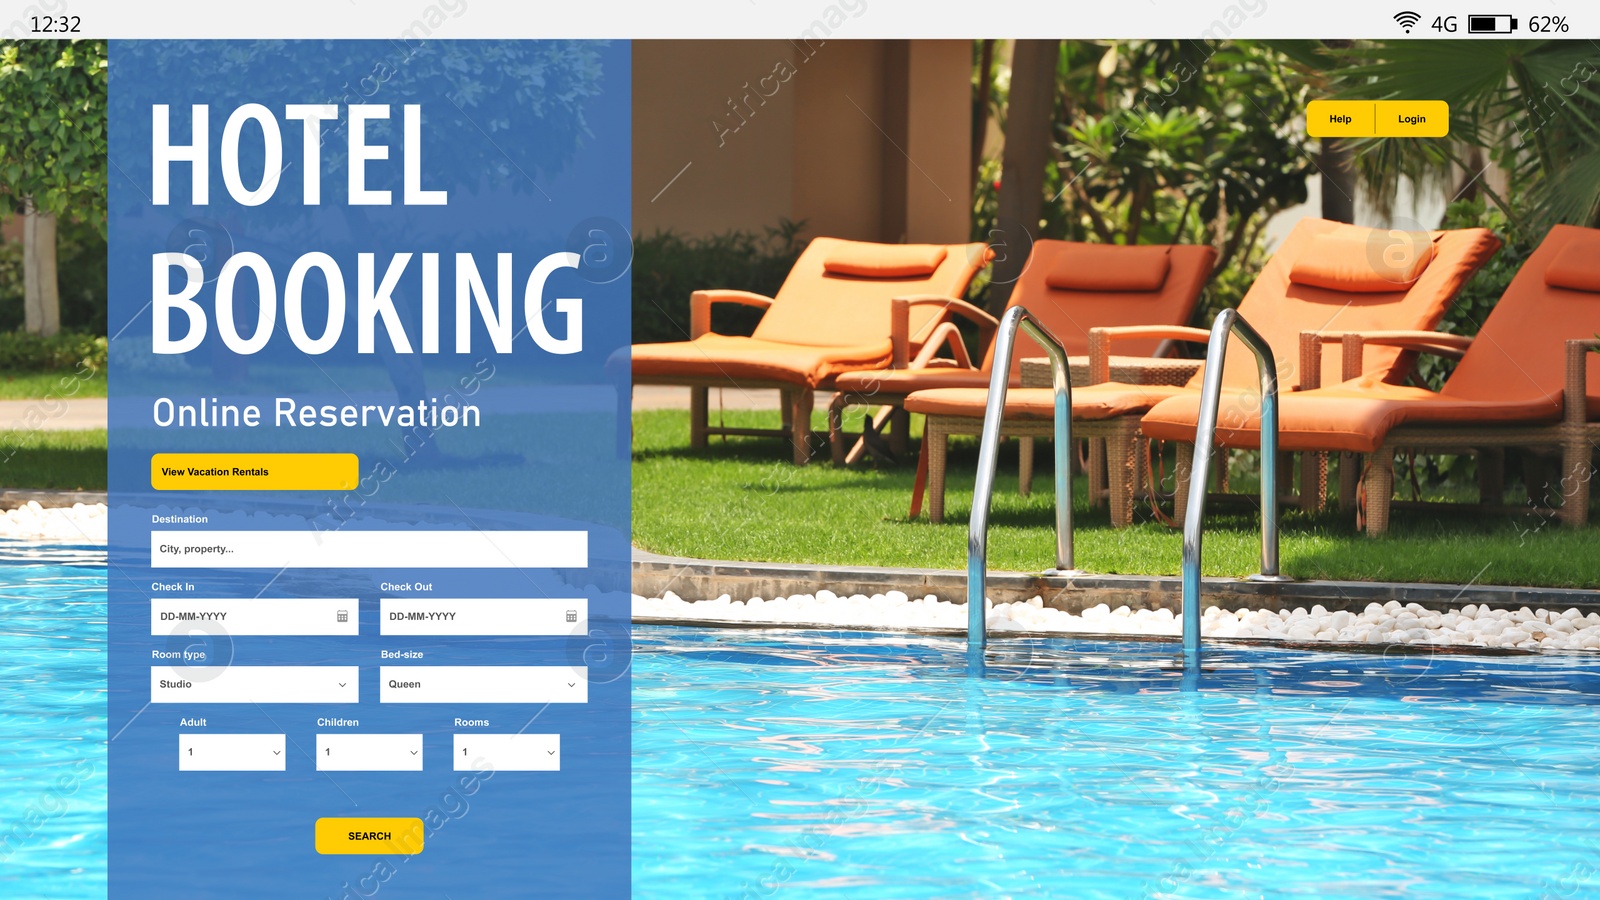 Image of Online hotel booking website interface with information